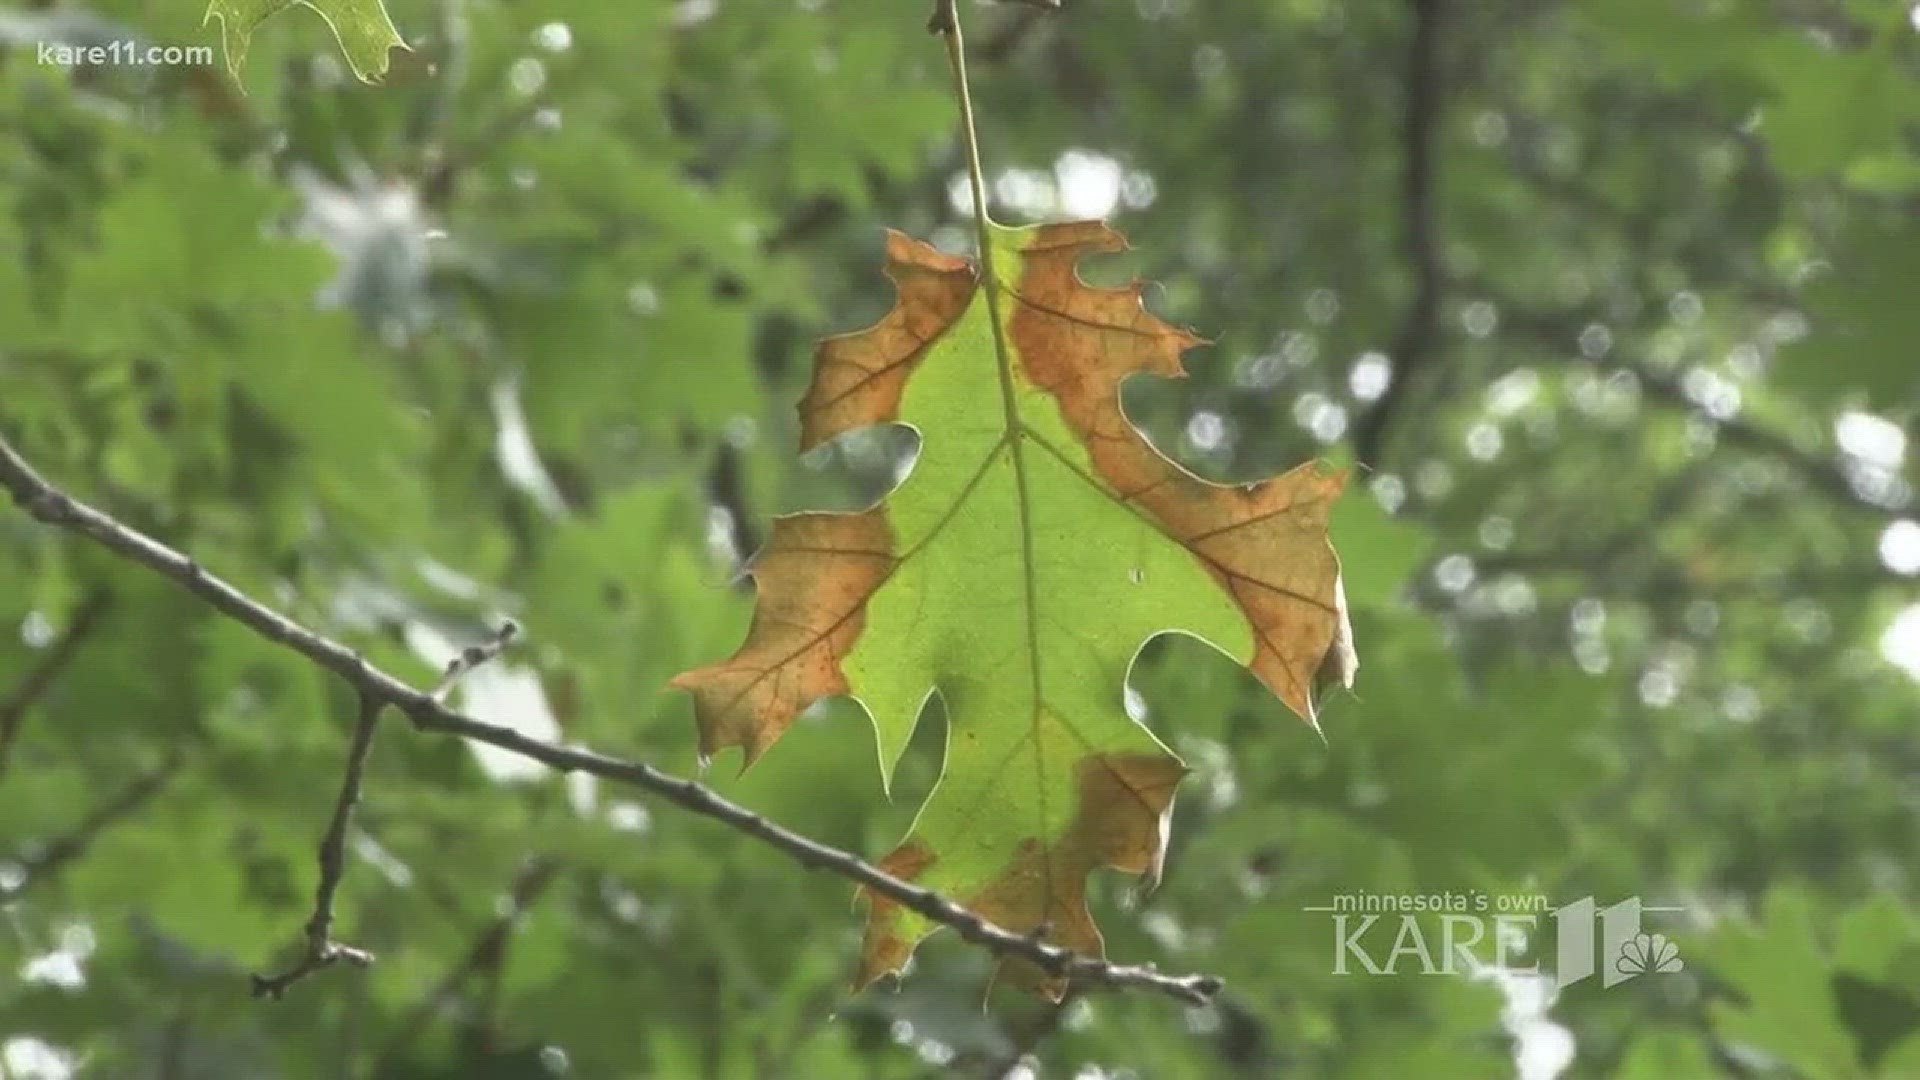 The spread of Oak wilt is happening quickly across our forests in Minnesota. There are ways you can test the tree for oak wilt, but currently those tests are expensive and can take weeks for results. http://kare11.tv/2ALAO86